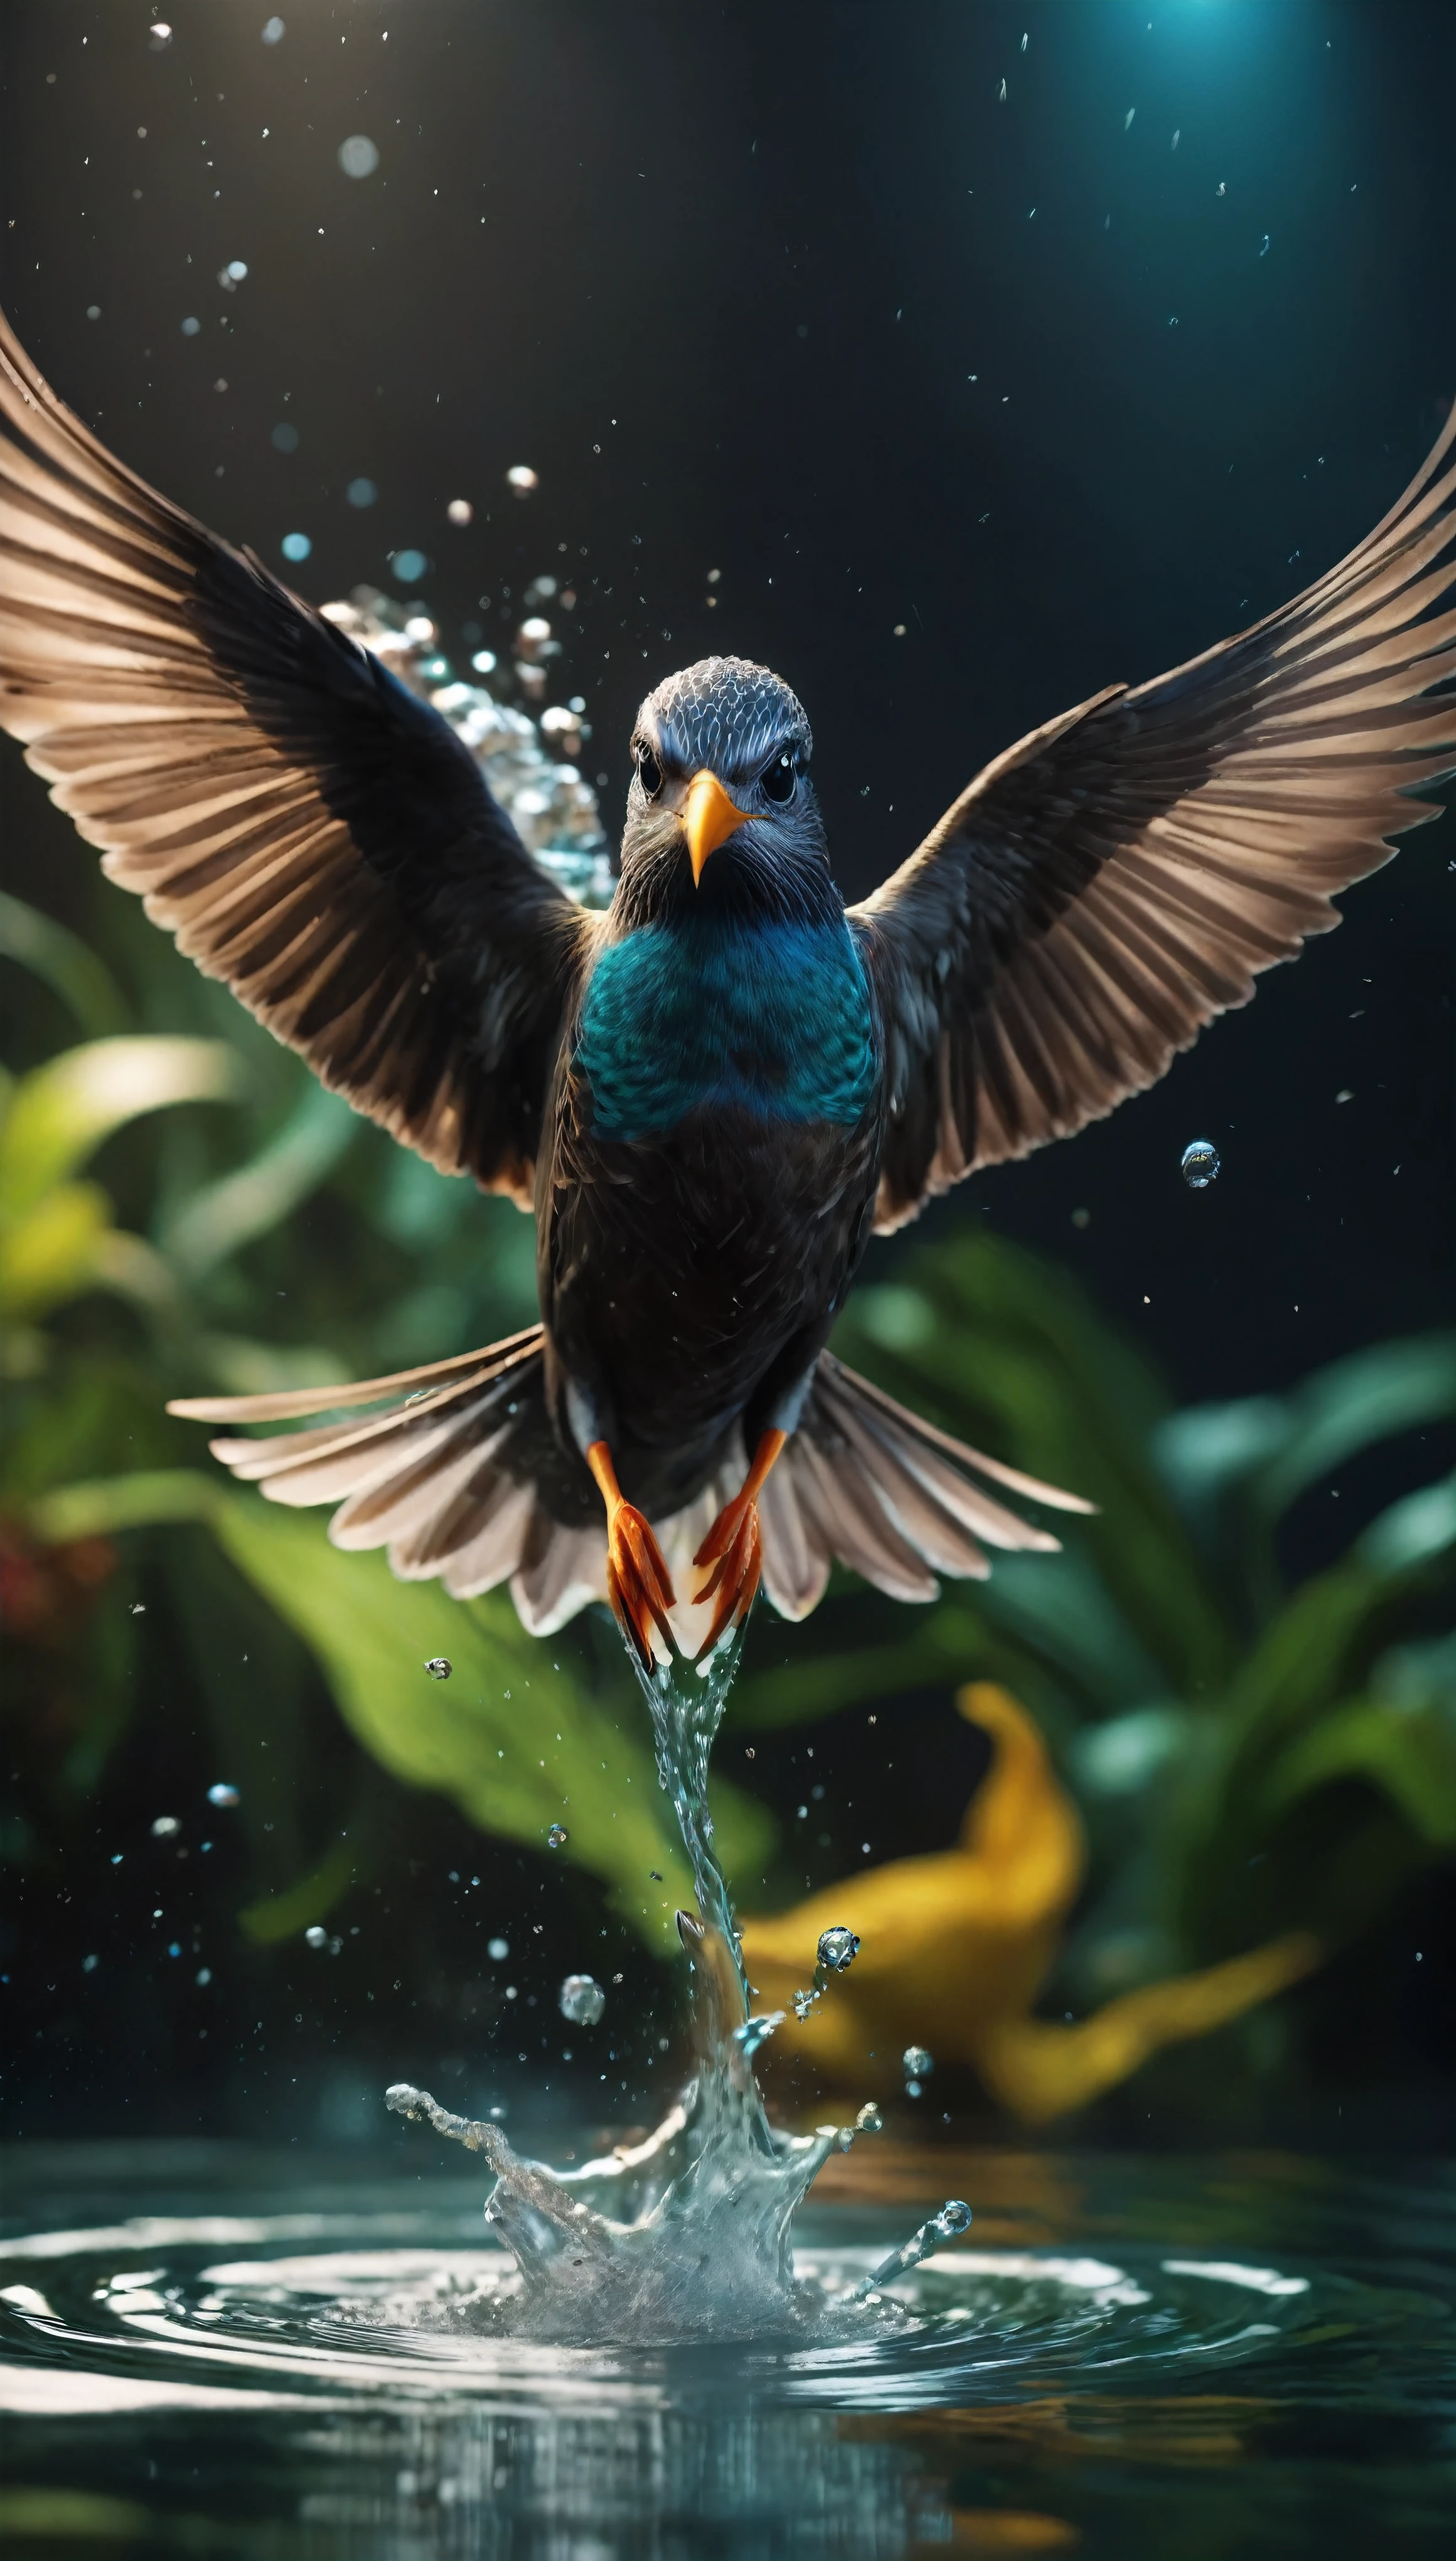 ((Masterpiece in maximum 16K resolution):1.6),((soft_color_photograpy:)1.5), ((Ultra-Detailed):1.4),((Movie-like still images and dynamic angles):1.3),| ((Macro shot cinematic photo of diving birds diving into water):1.2), ((high speed dive):1.1), ((diving form):1.2), (macro lens), (tyndall effect), (a lot of splashes), (water splashes), (shimmer), (visual experience) ,(Realism), (Realistic),award-winning graphics, dark shot, film grain, extremely detailed, Digital Art, rtx, Unreal Engine, scene concept anti glare effect, All captured with sharp focus. | Rendered in ultra-high definition with UHD and retina quality, this masterpiece ensures anatomical correctness and textured skin with super detail. With a focus on high quality and accuracy, this award-winning portrayal captures every nuance in stunning 16k resolution, immersing viewers in its lifelike depiction. | ((perfect_composition, perfect_design, perfect_layout, perfect_detail, ultra_detailed)), ((enhance_all, fix_everything)), More Detail, Enhance.